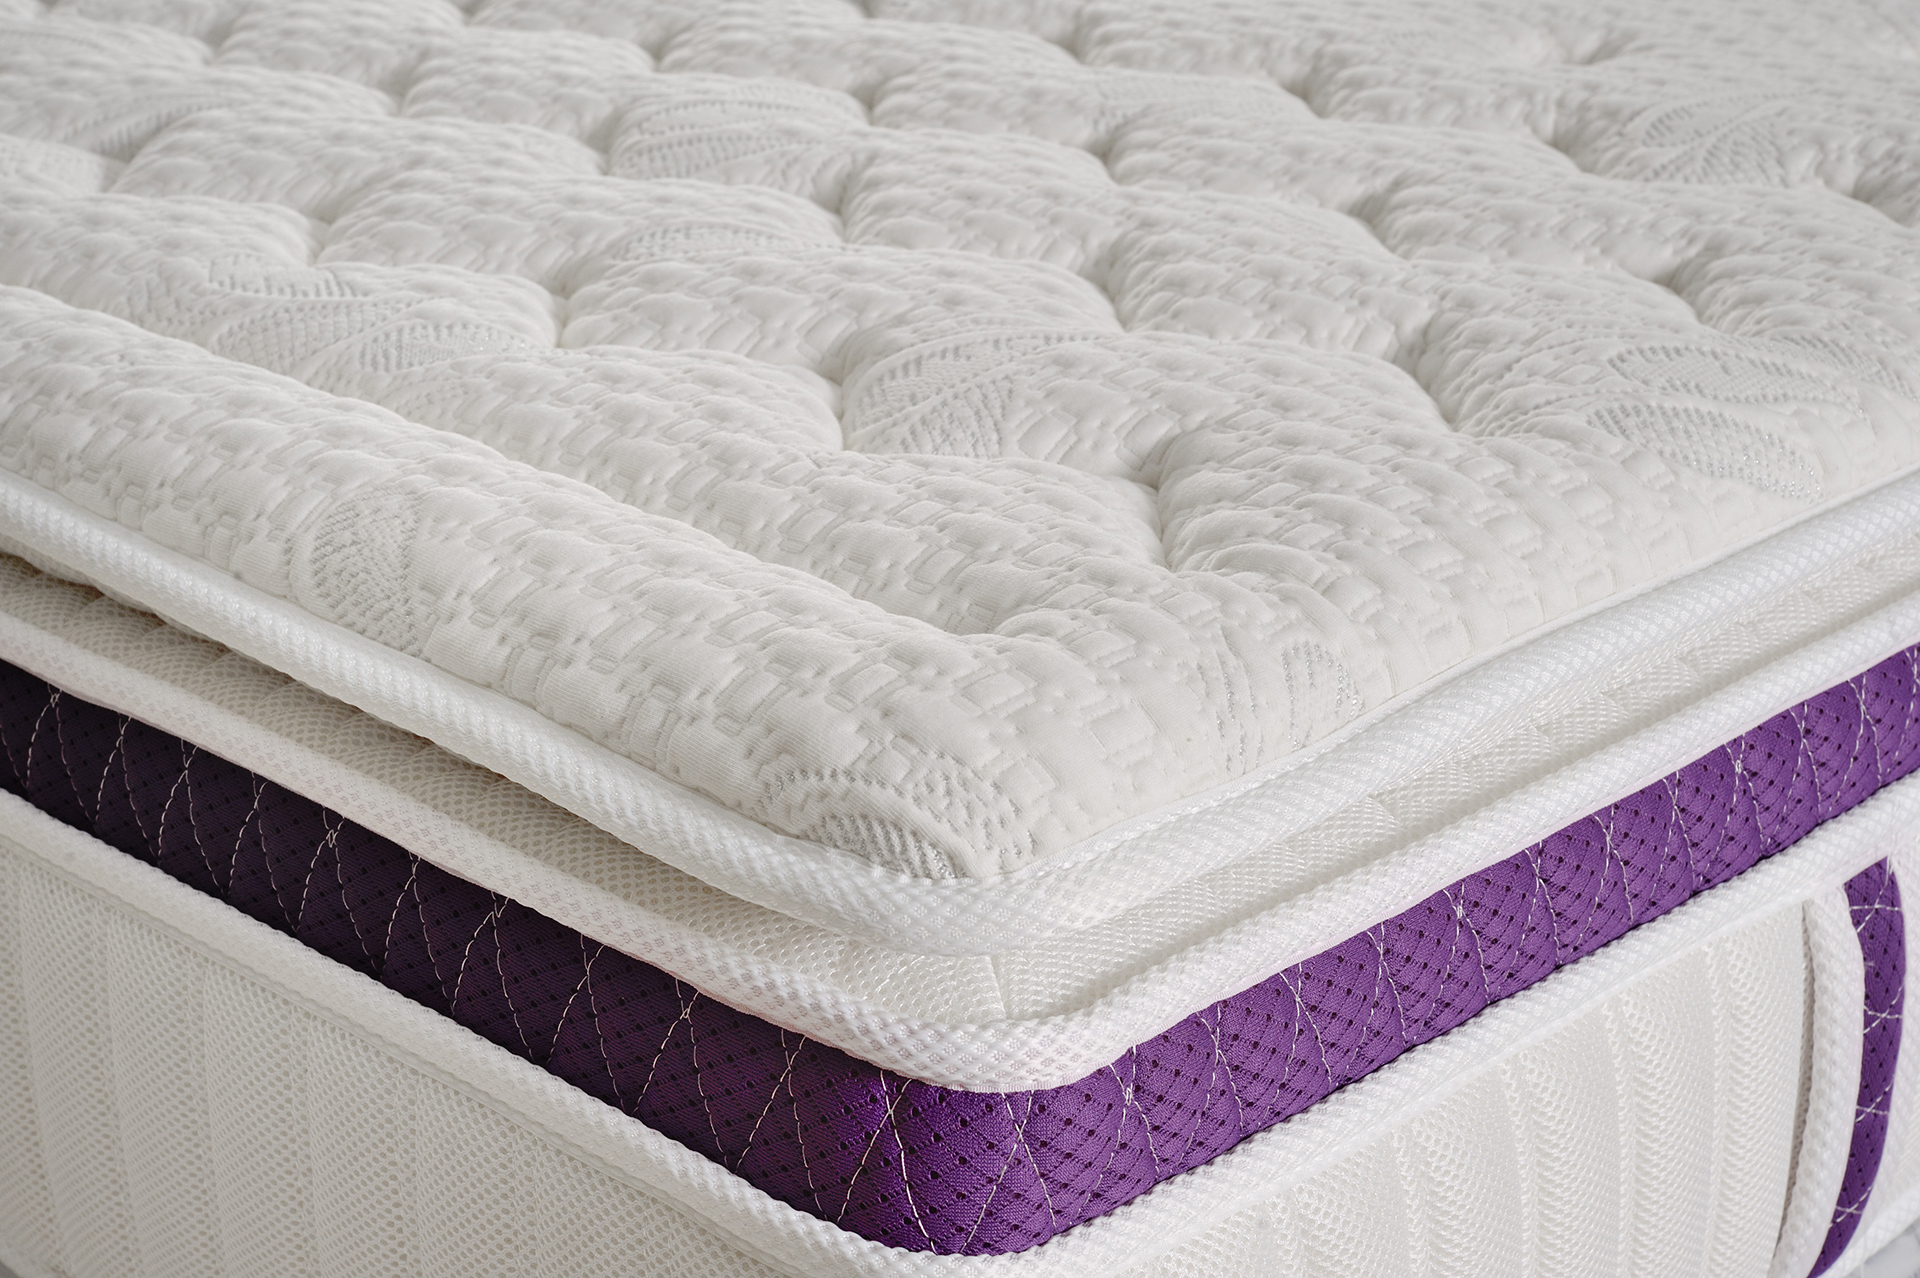 Tips For Keeping Your Mattress In The Box For A Longer Period